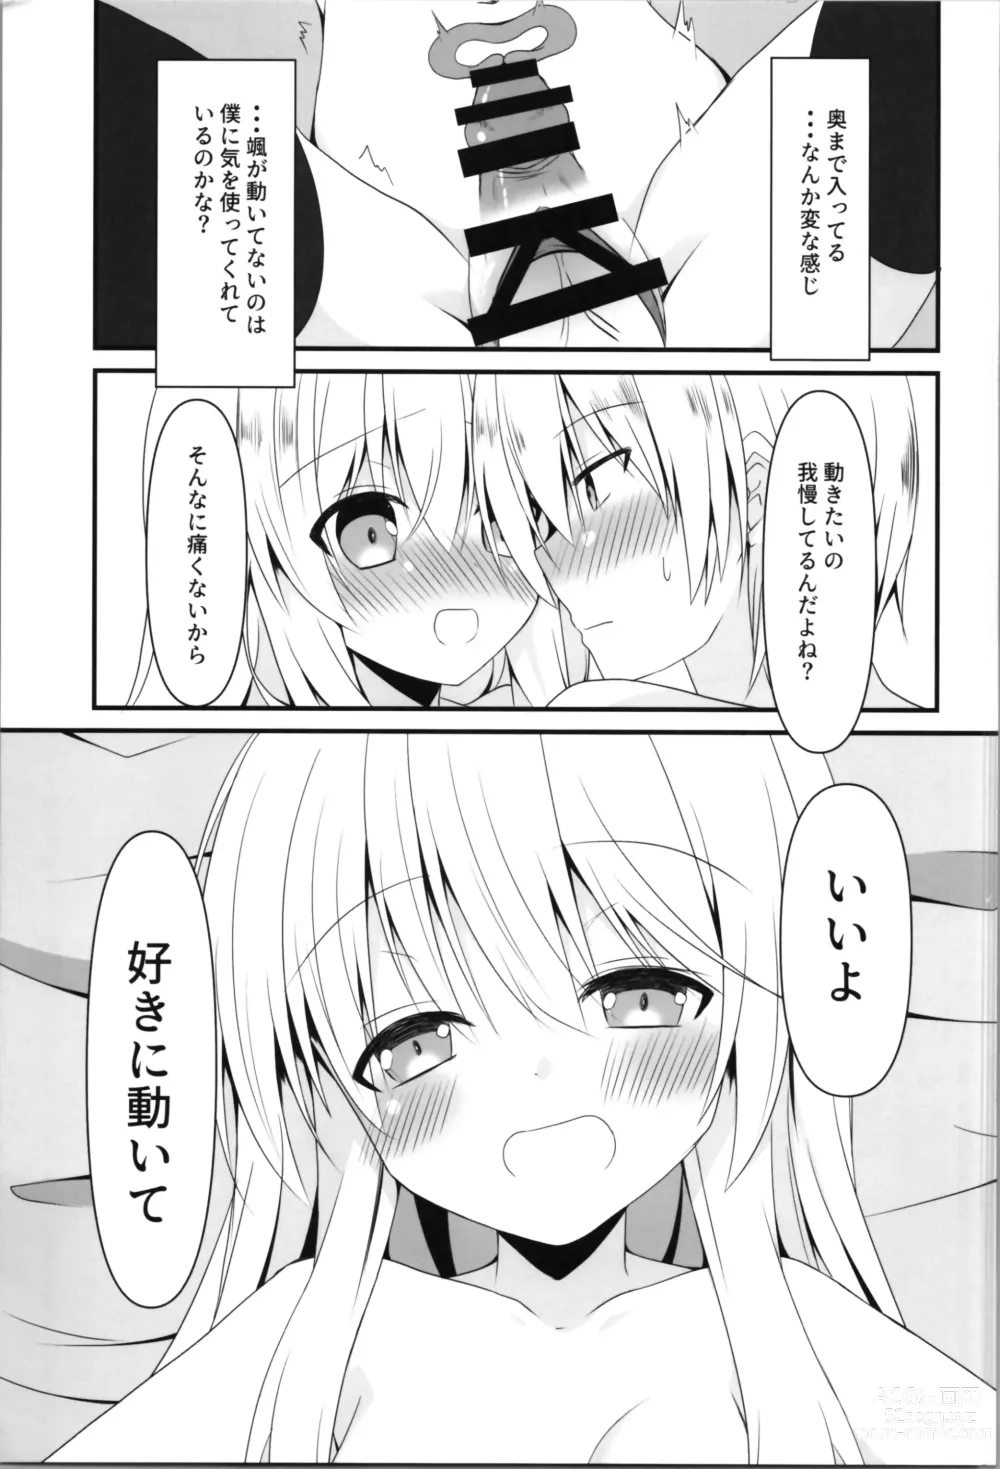 Page 17 of doujinshi Being an understanding person, I decided to help my best friend.